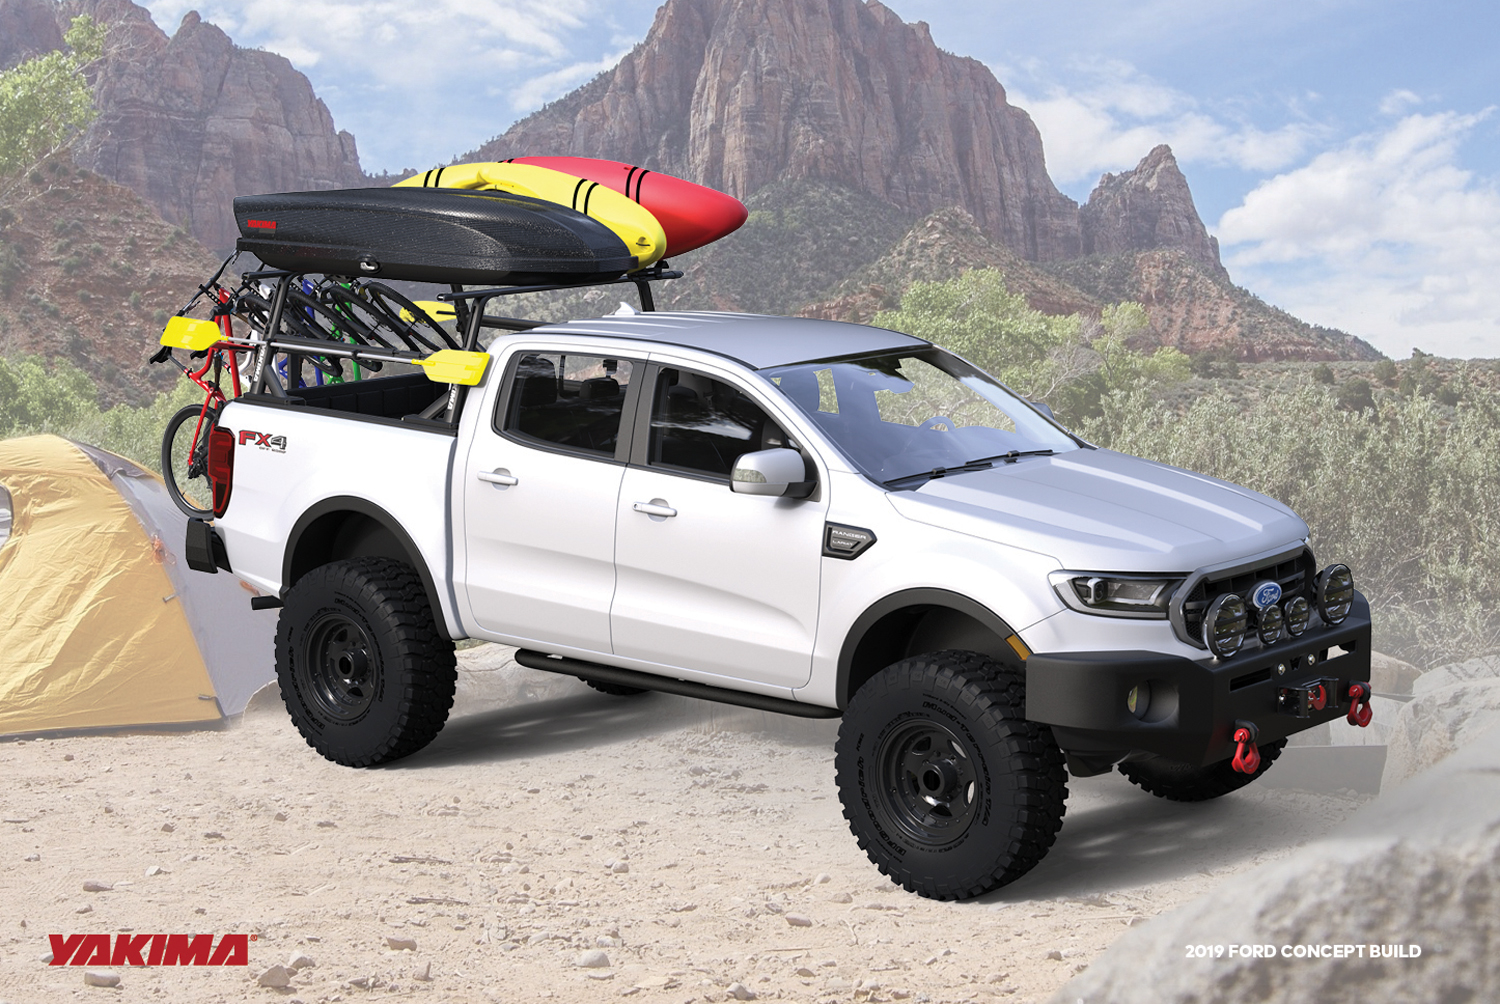 The Yakima Ford Ranger Has All The Accessories